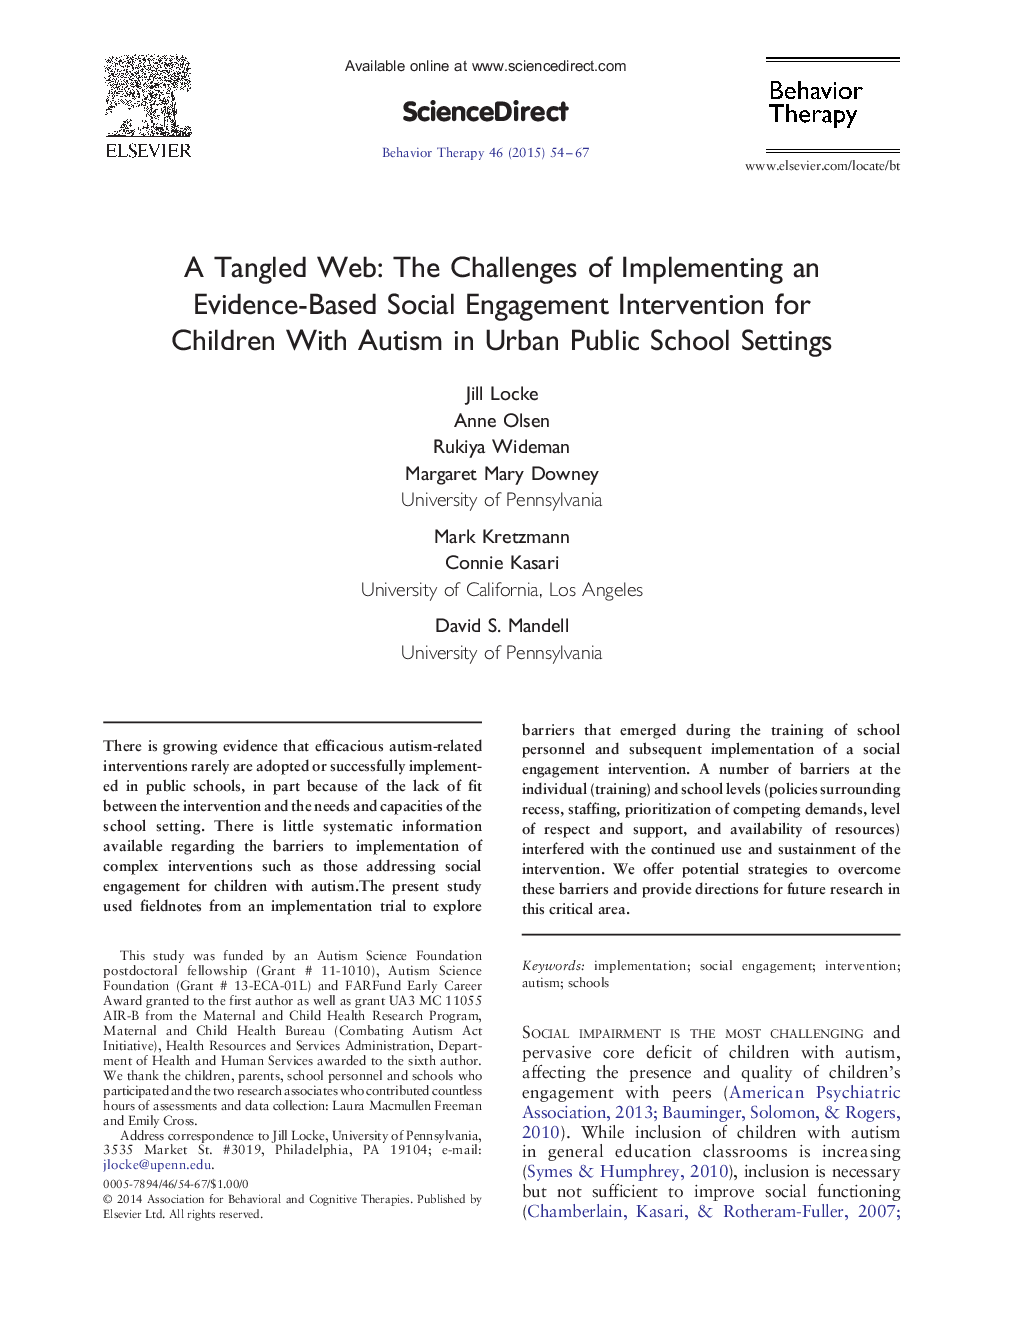 A Tangled Web: The Challenges of Implementing an Evidence-Based Social Engagement Intervention for Children With Autism in Urban Public School Settings 